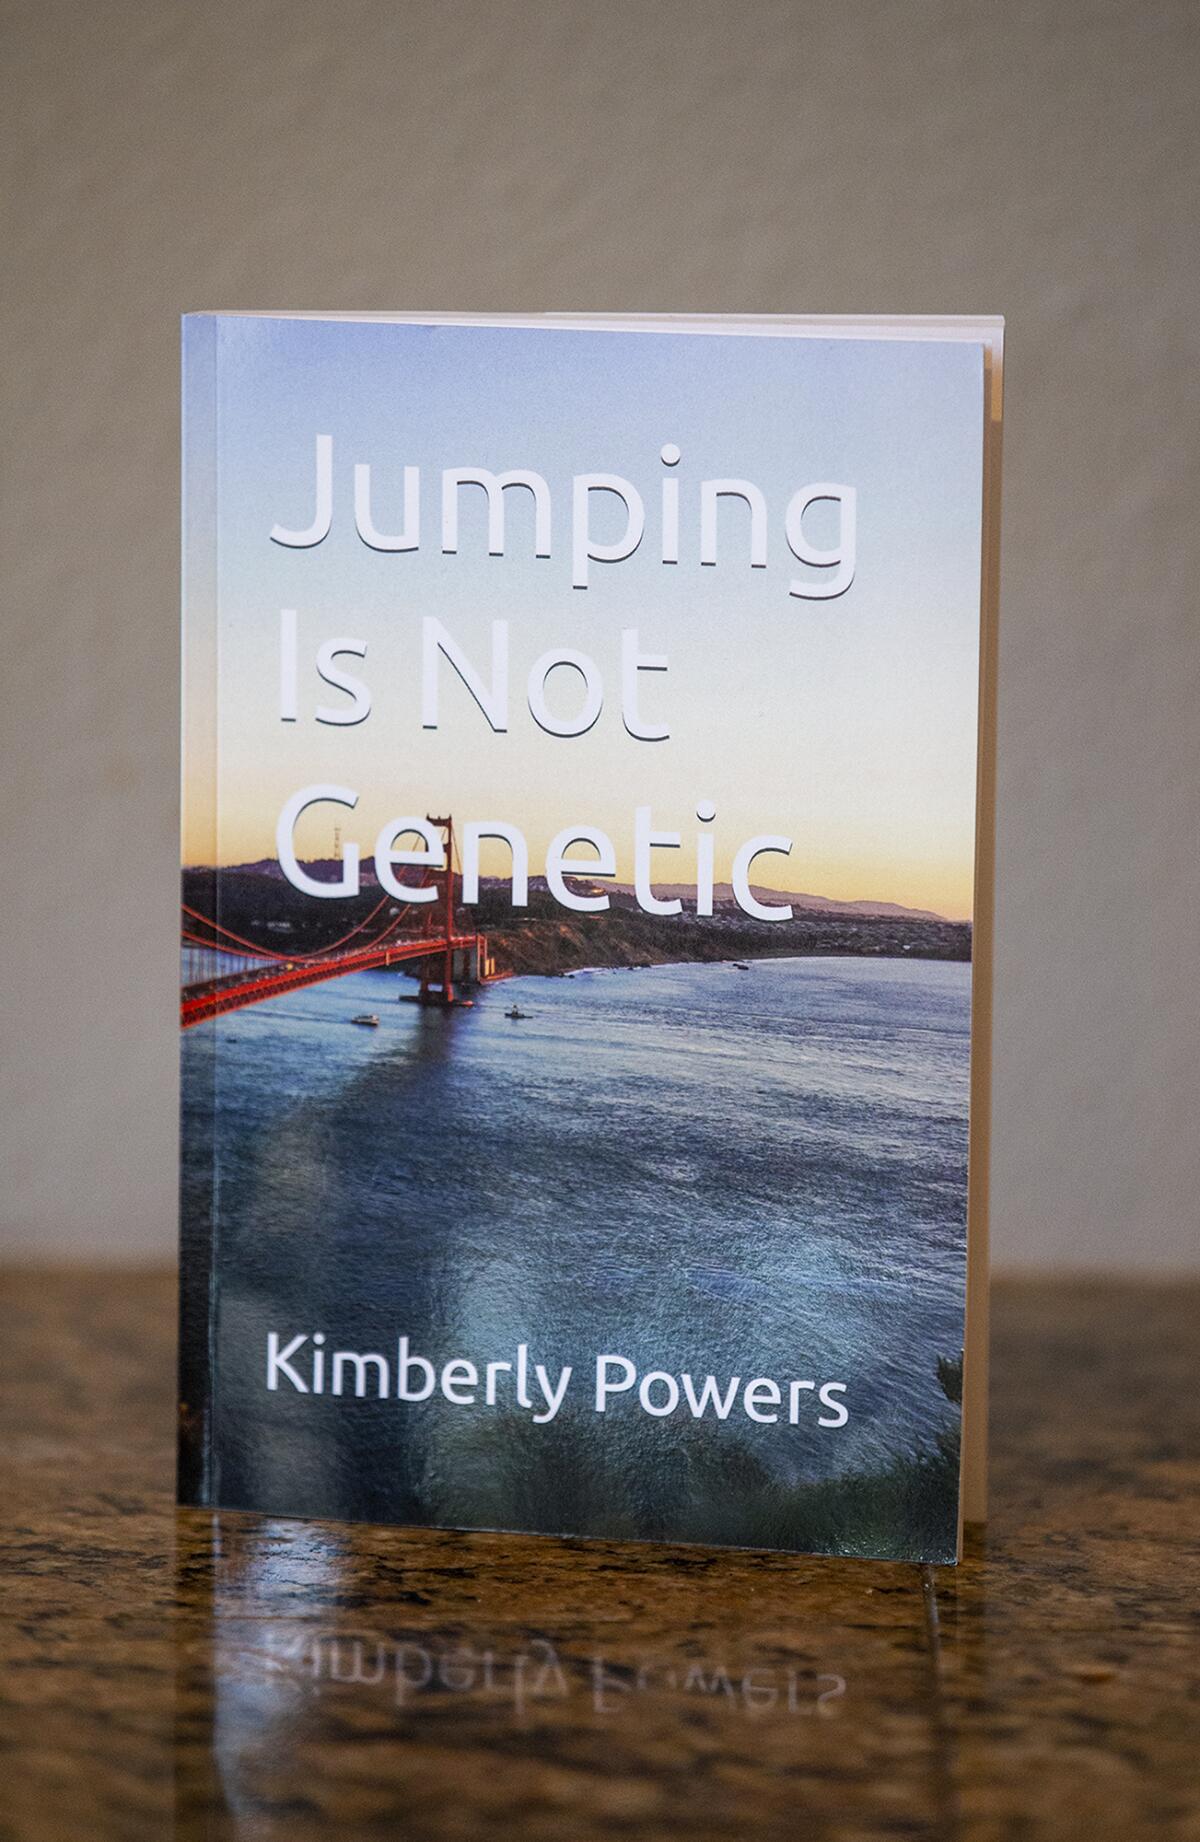 Dr. Kimberly Powers recently published her first book, "Jumping Is Not Genetic."